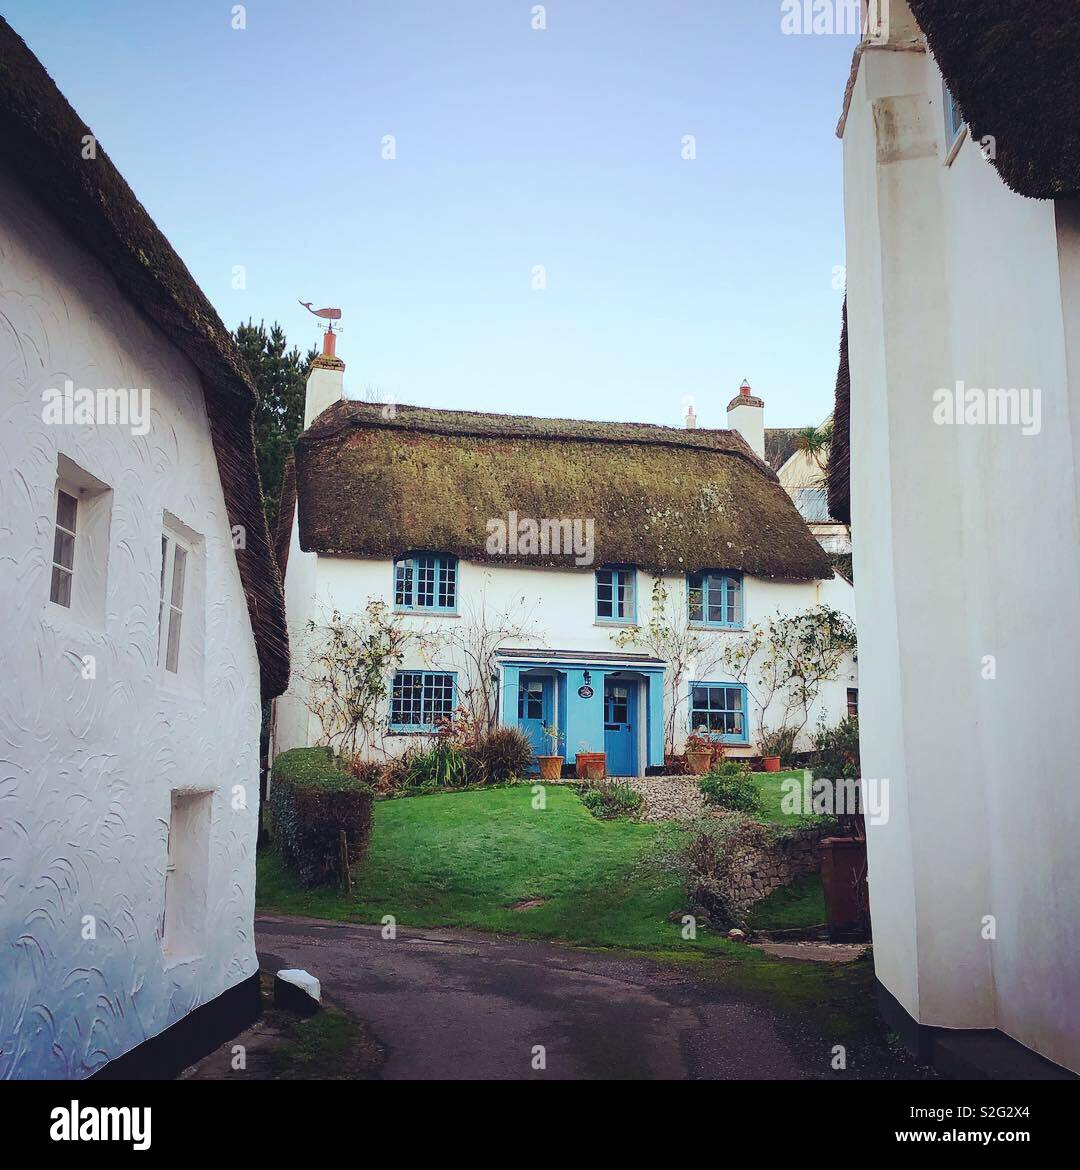 Thatched cottages in Hope Cove, Devon Stock Photo